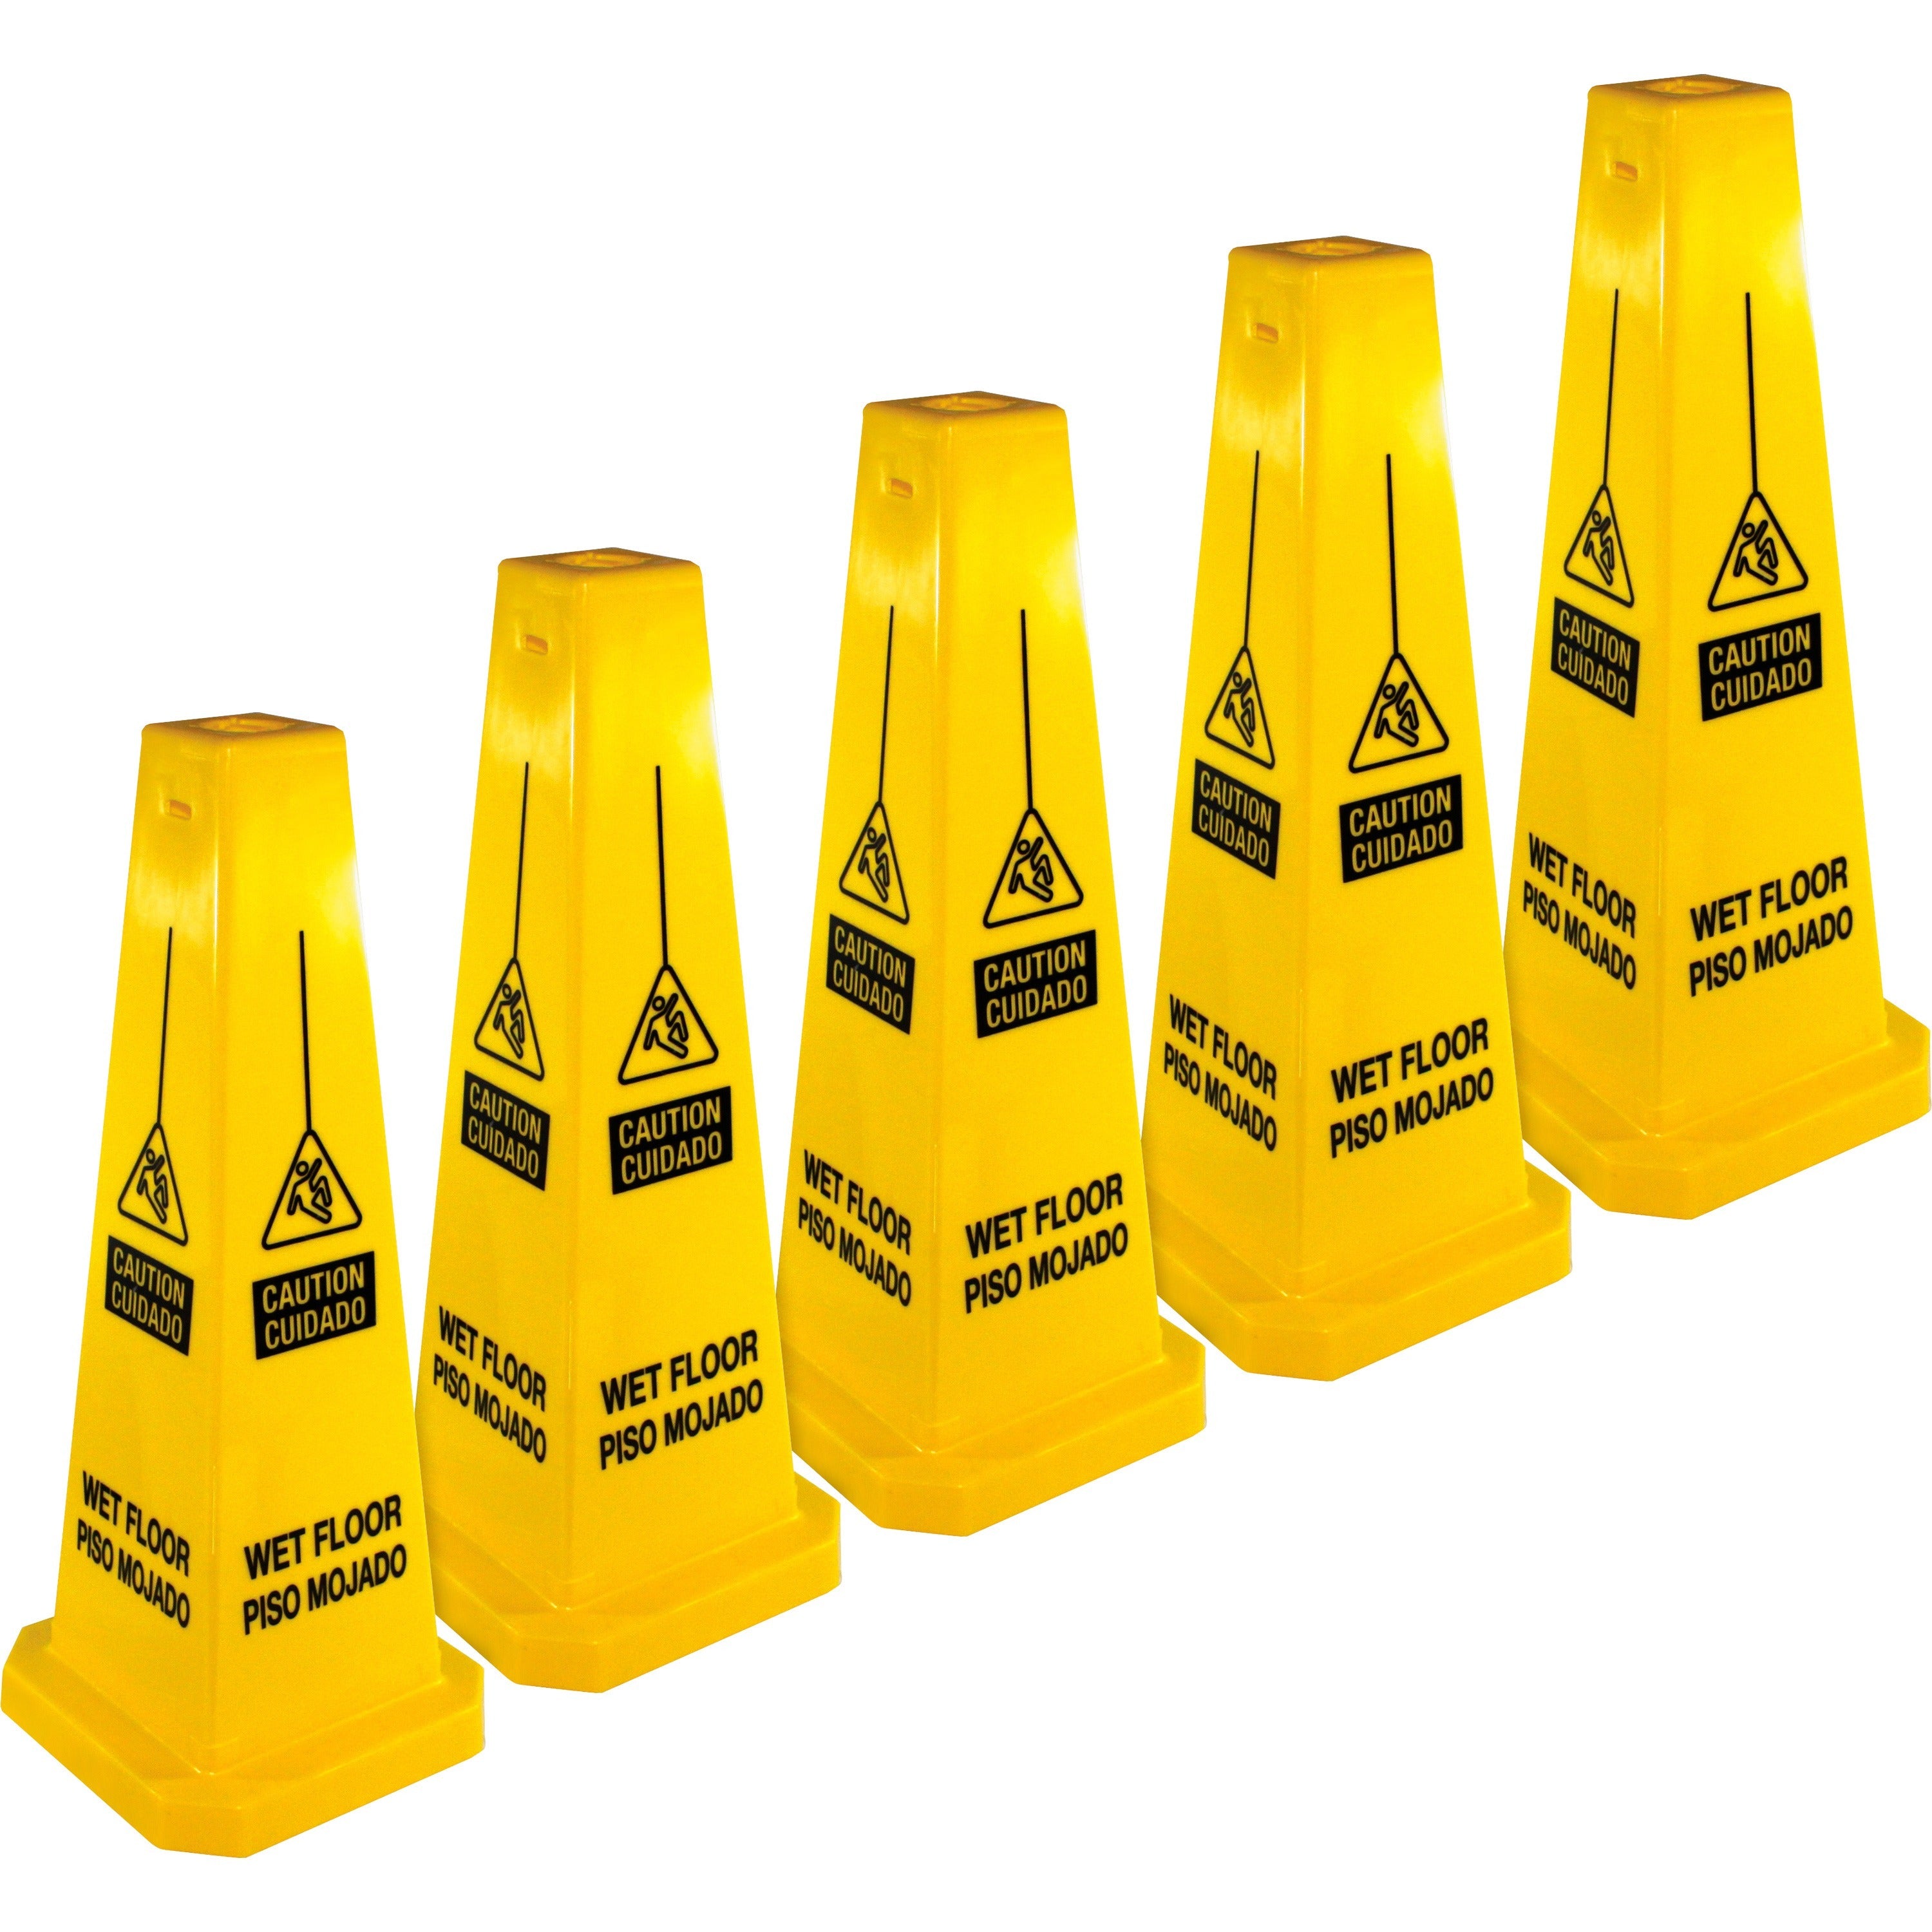 genuine-joe-bright-4-sided-caution-safety-cone-5-carton-english-spanish-10-width-x-24-height-x-10-depth-cone-shape-stackable-industrial-polypropylene-yellow_gjo58880ct - 1